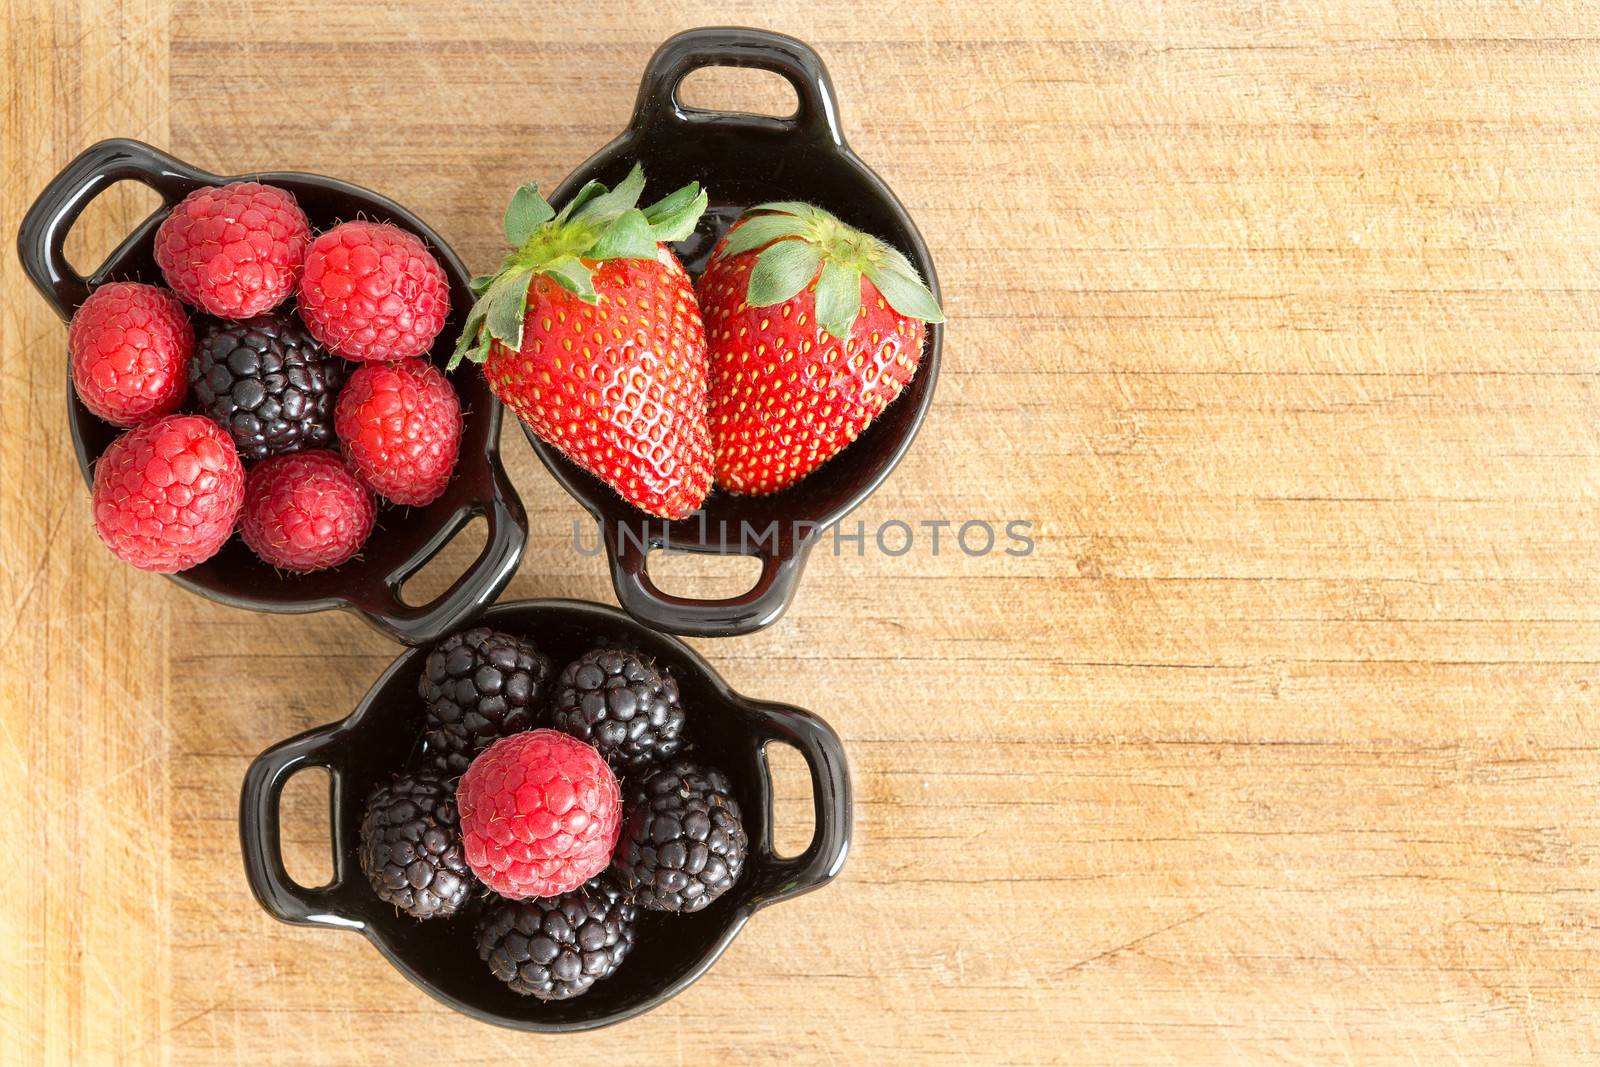 Overhead view of three ceramic ramekins full of healthy ripe fresh mixed berries including strawberries, blackberries and raspberries on a wooden surface with copyspace